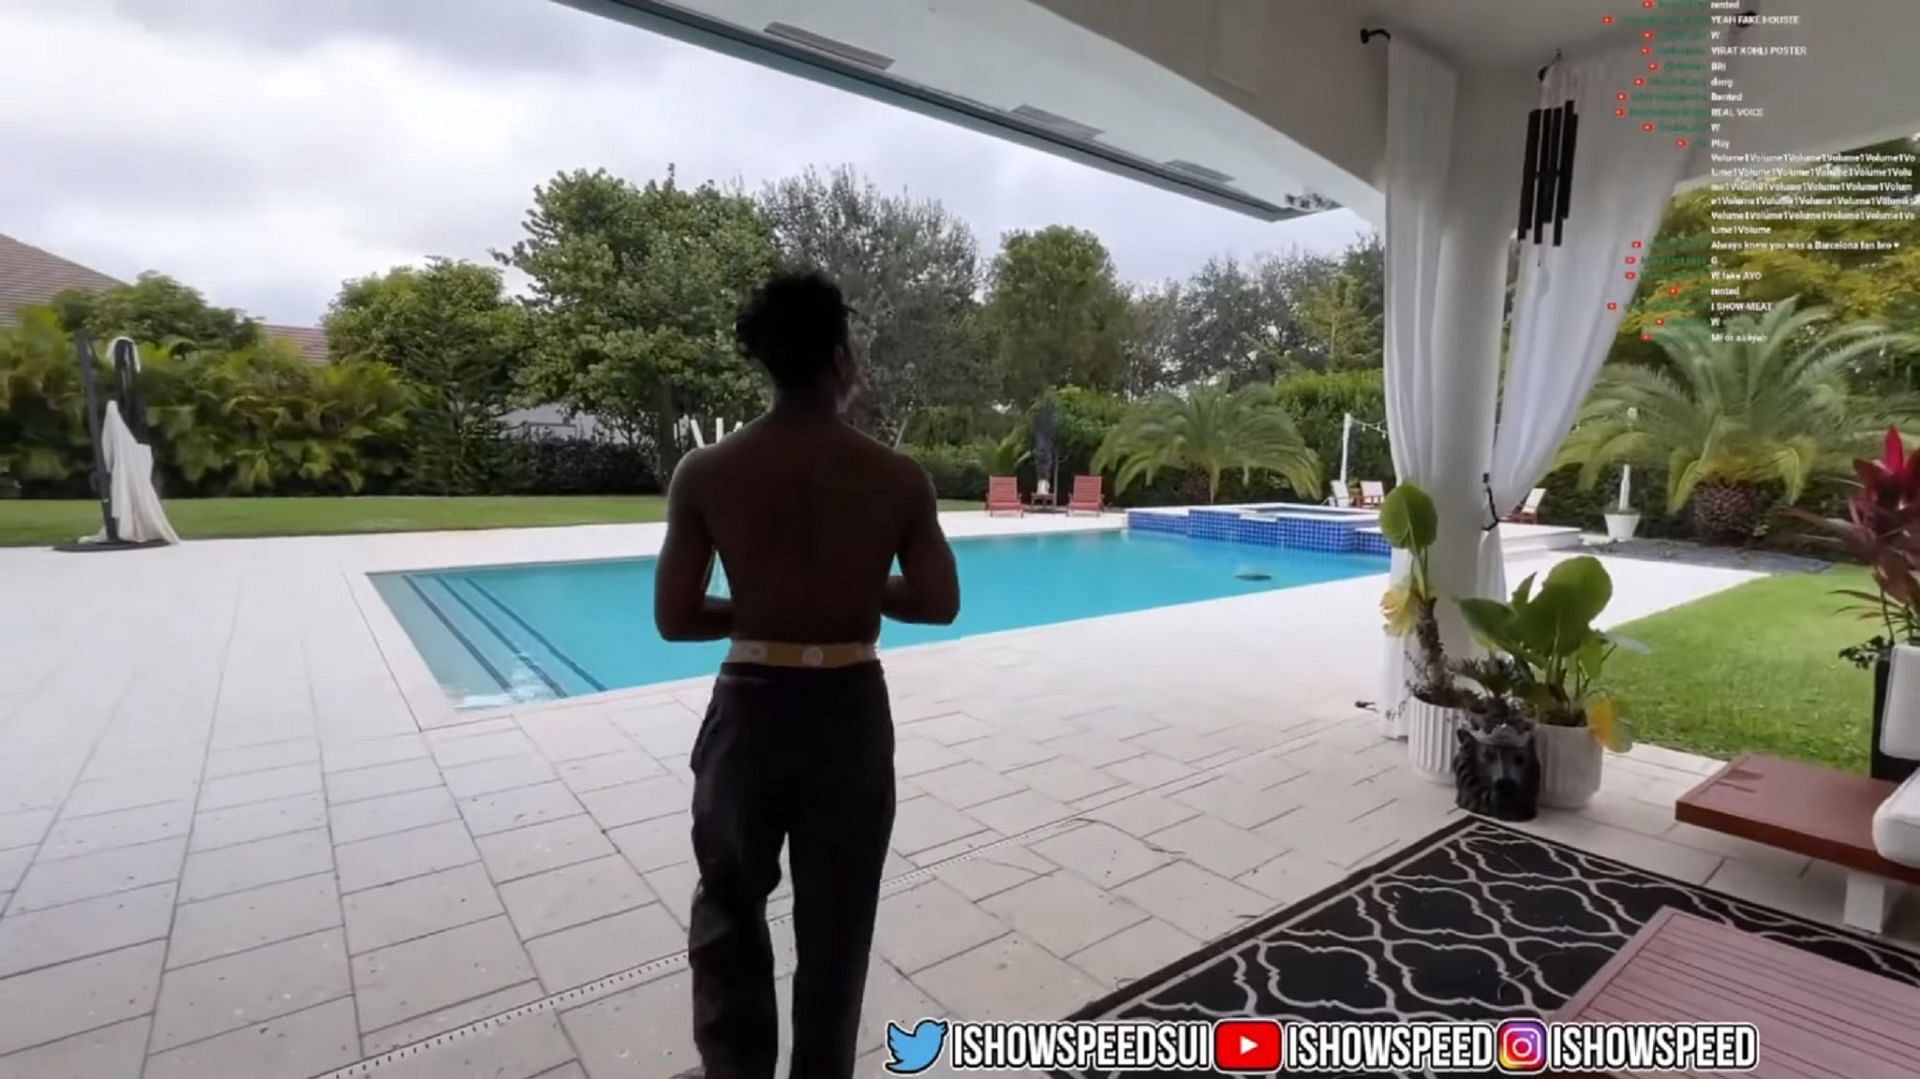 Finally bought me a house: 18-year-old  streamer IShowSpeed gives  viewers a tour of his $10 million mansion